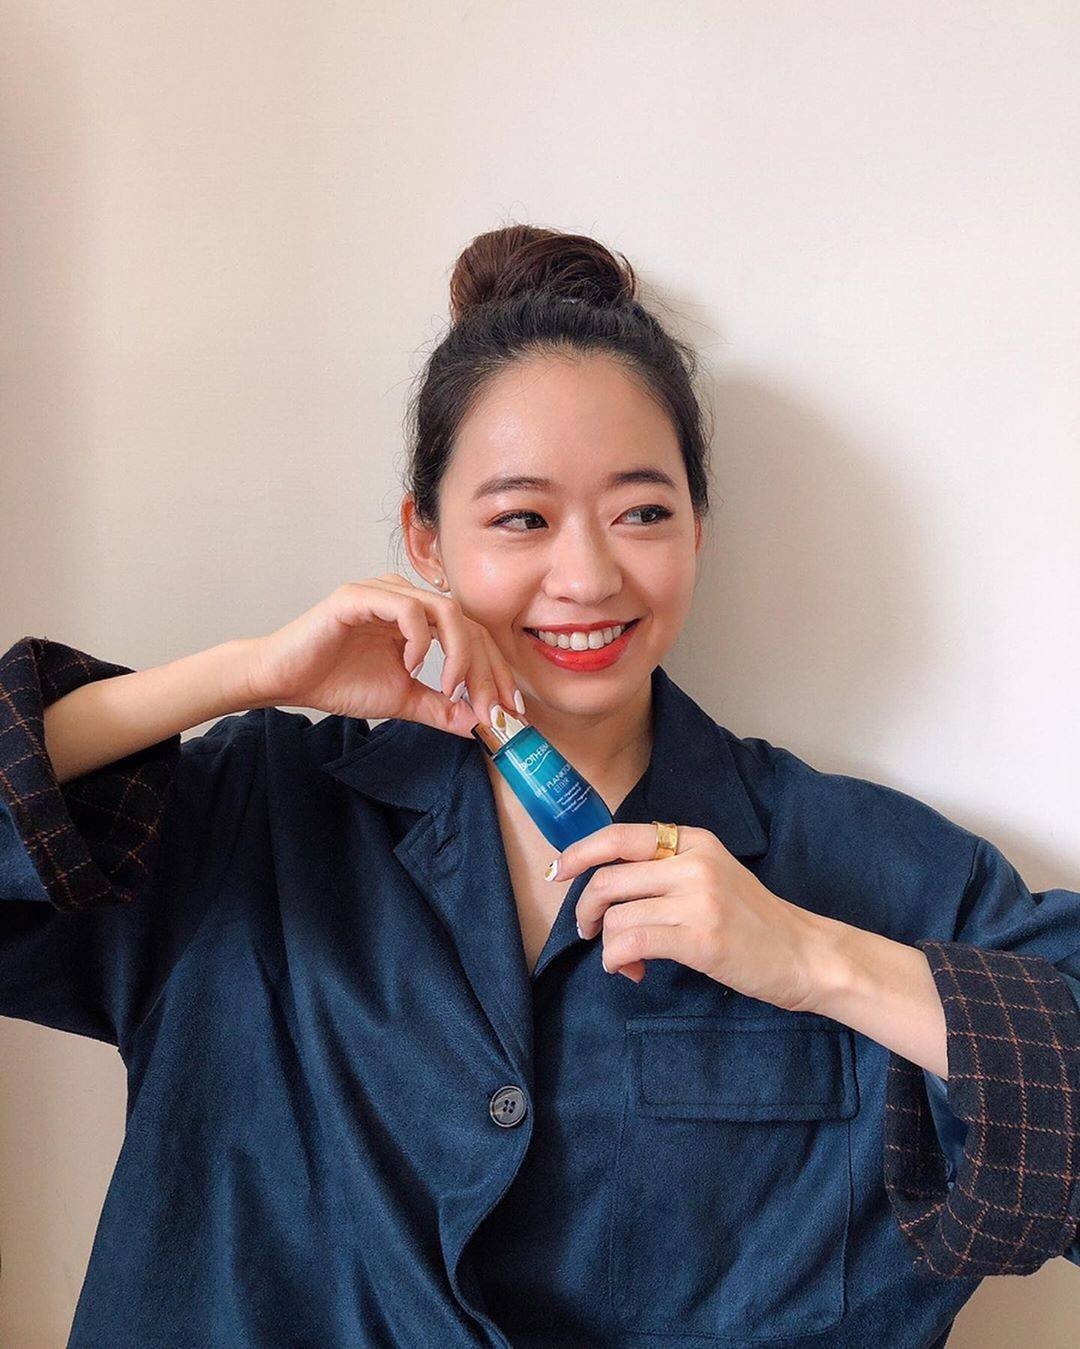 BIOTHERM - We love to see our #BiothermFamily in a moment of joy

Find your smile, like @annmodetw, with daily use of Life Plankton™ Elixir. Containing the highest concentration of potent Life Plankto...